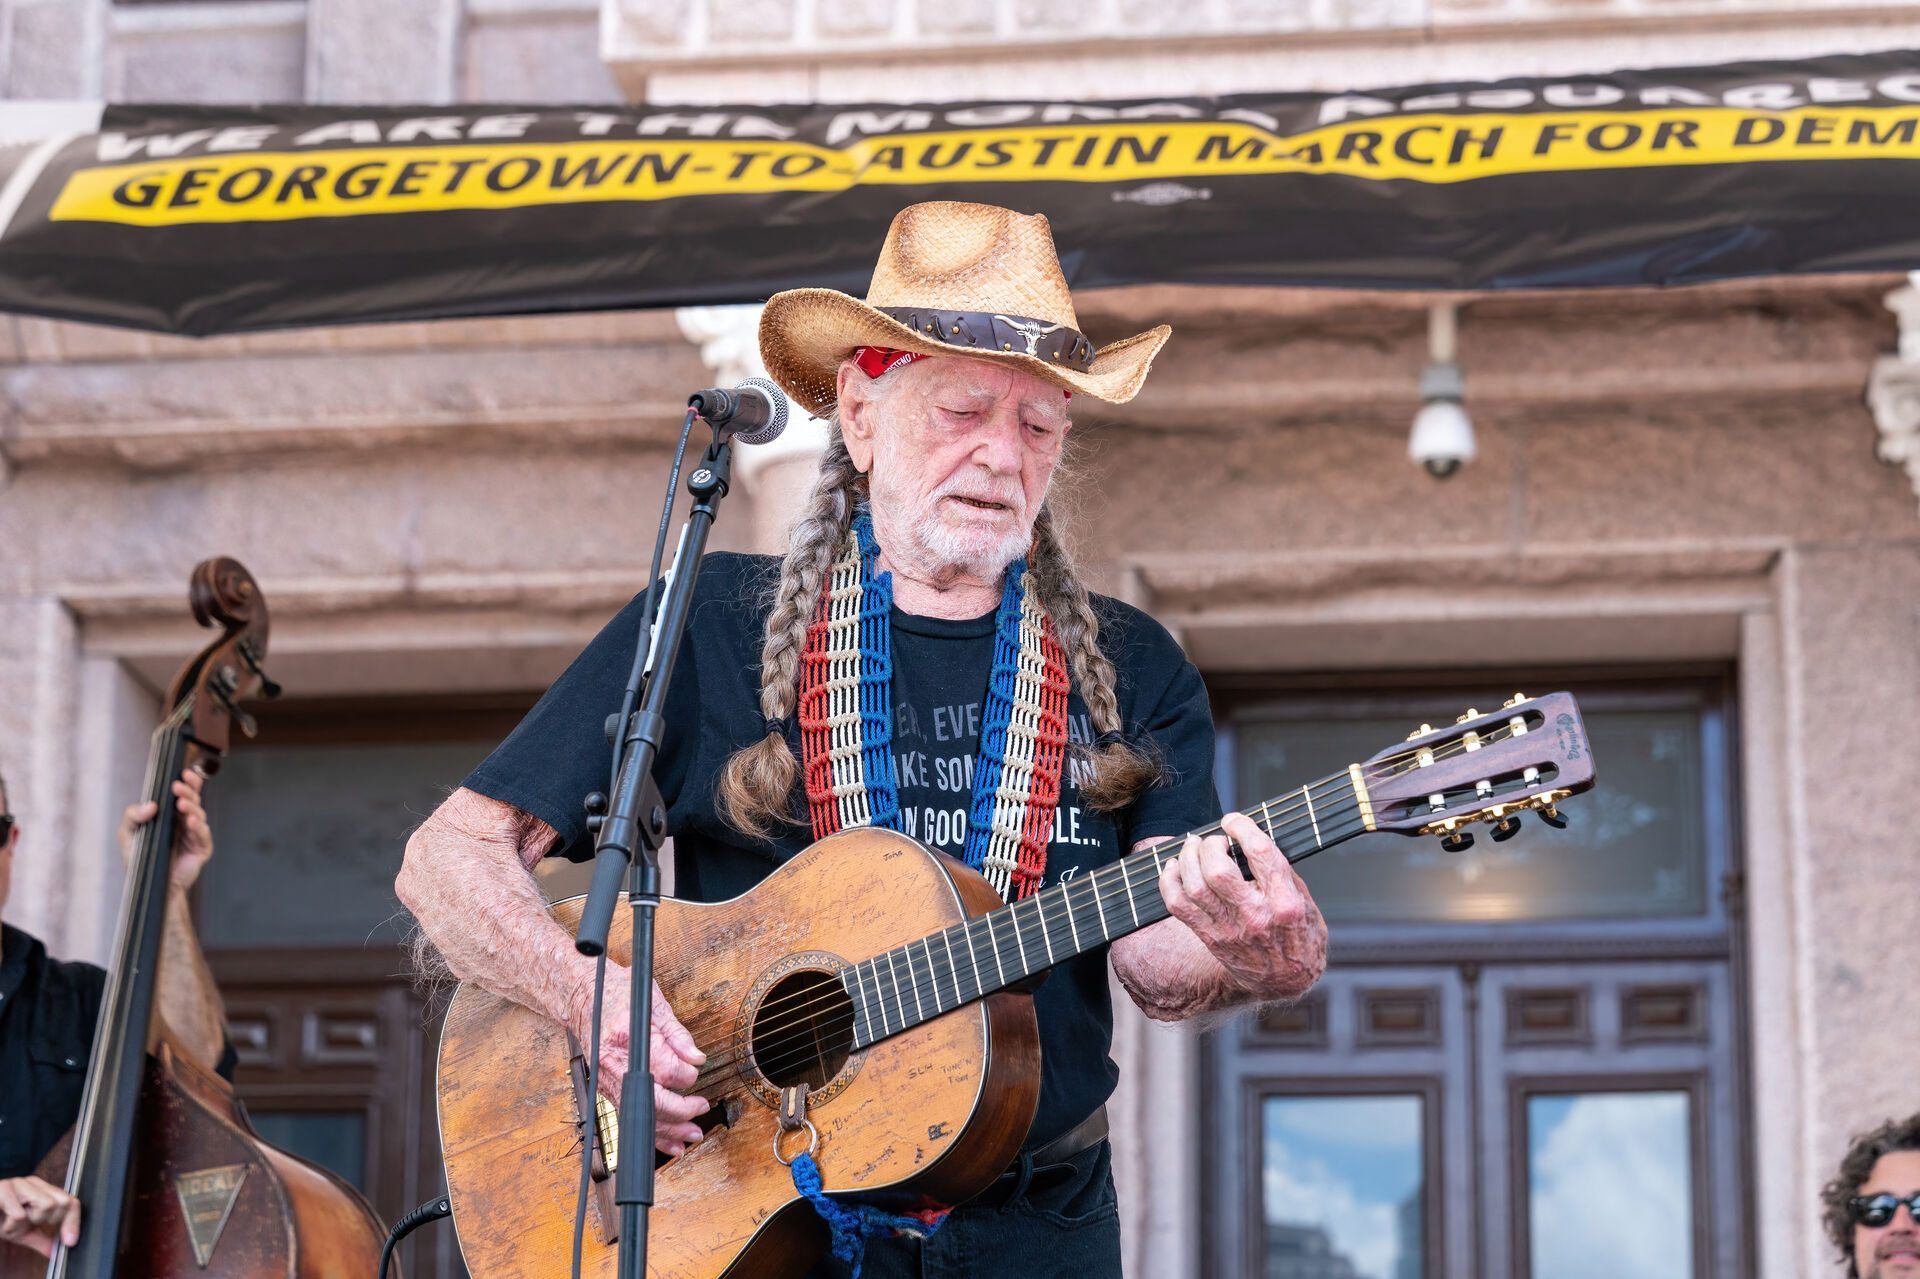 Rockhistorier om Willie Nelson: Countryens store outlaw bliver 90